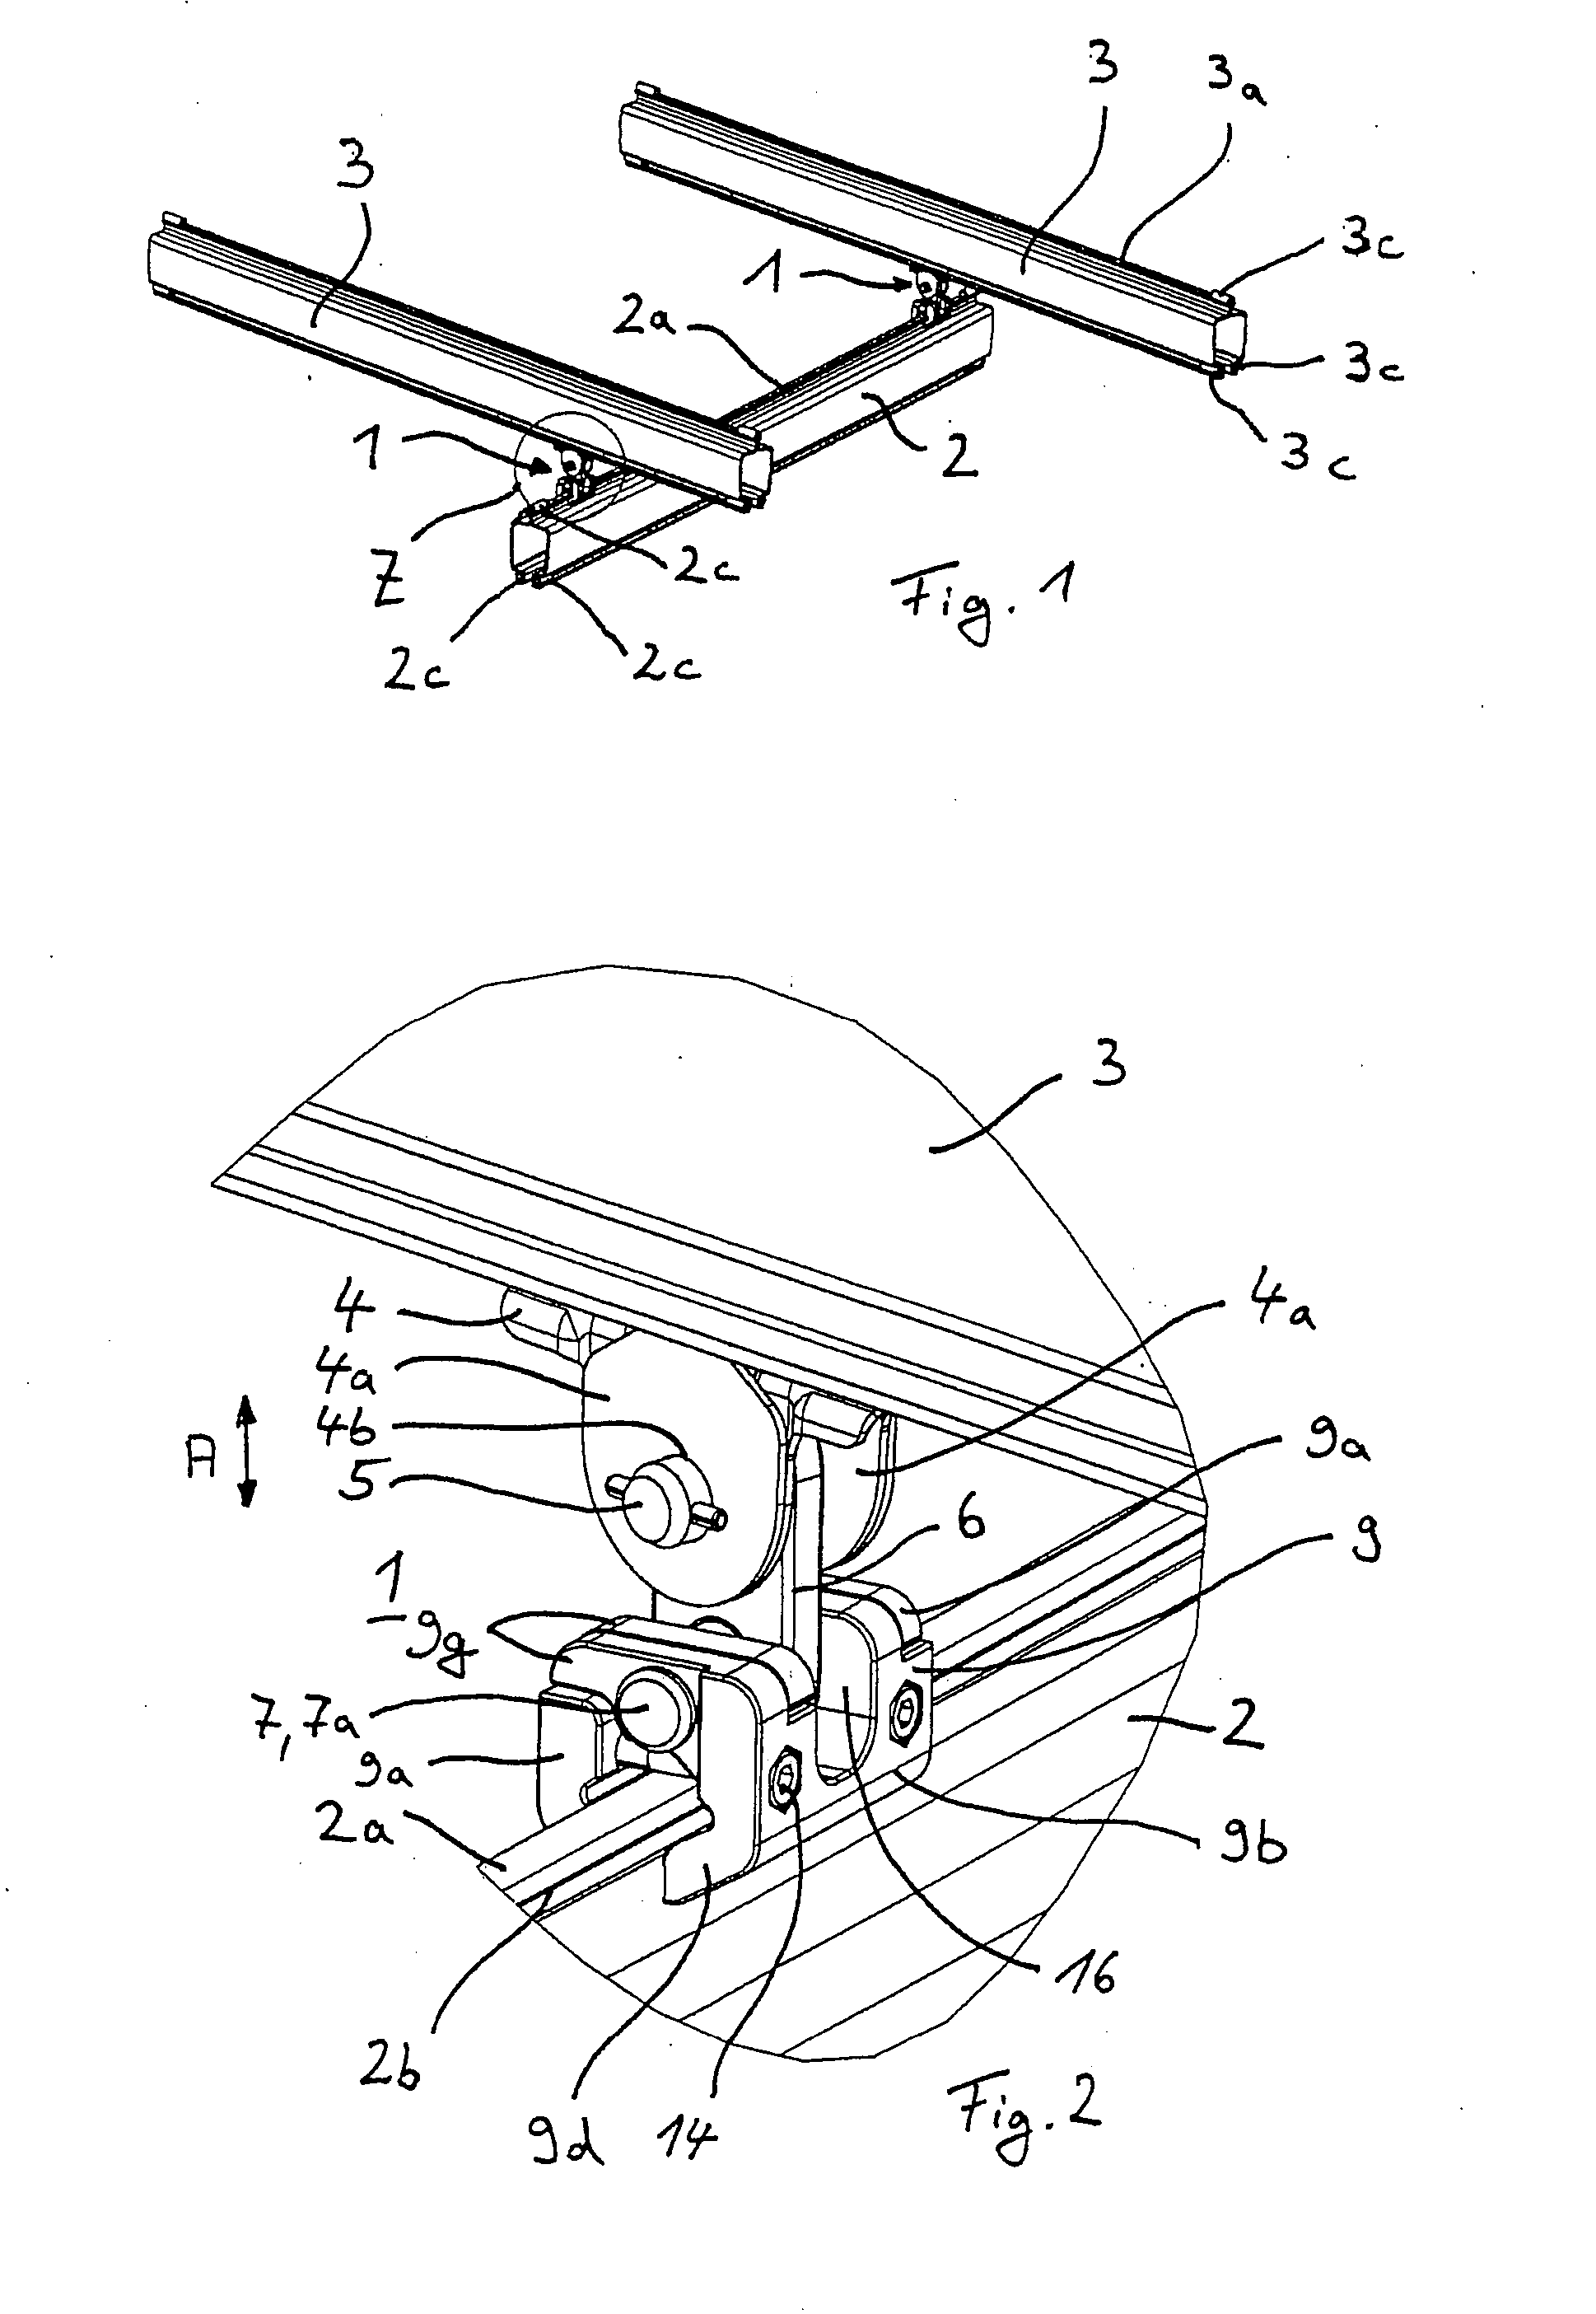 Device for suspending a rail of an overhead conveyor or a hoisting machine